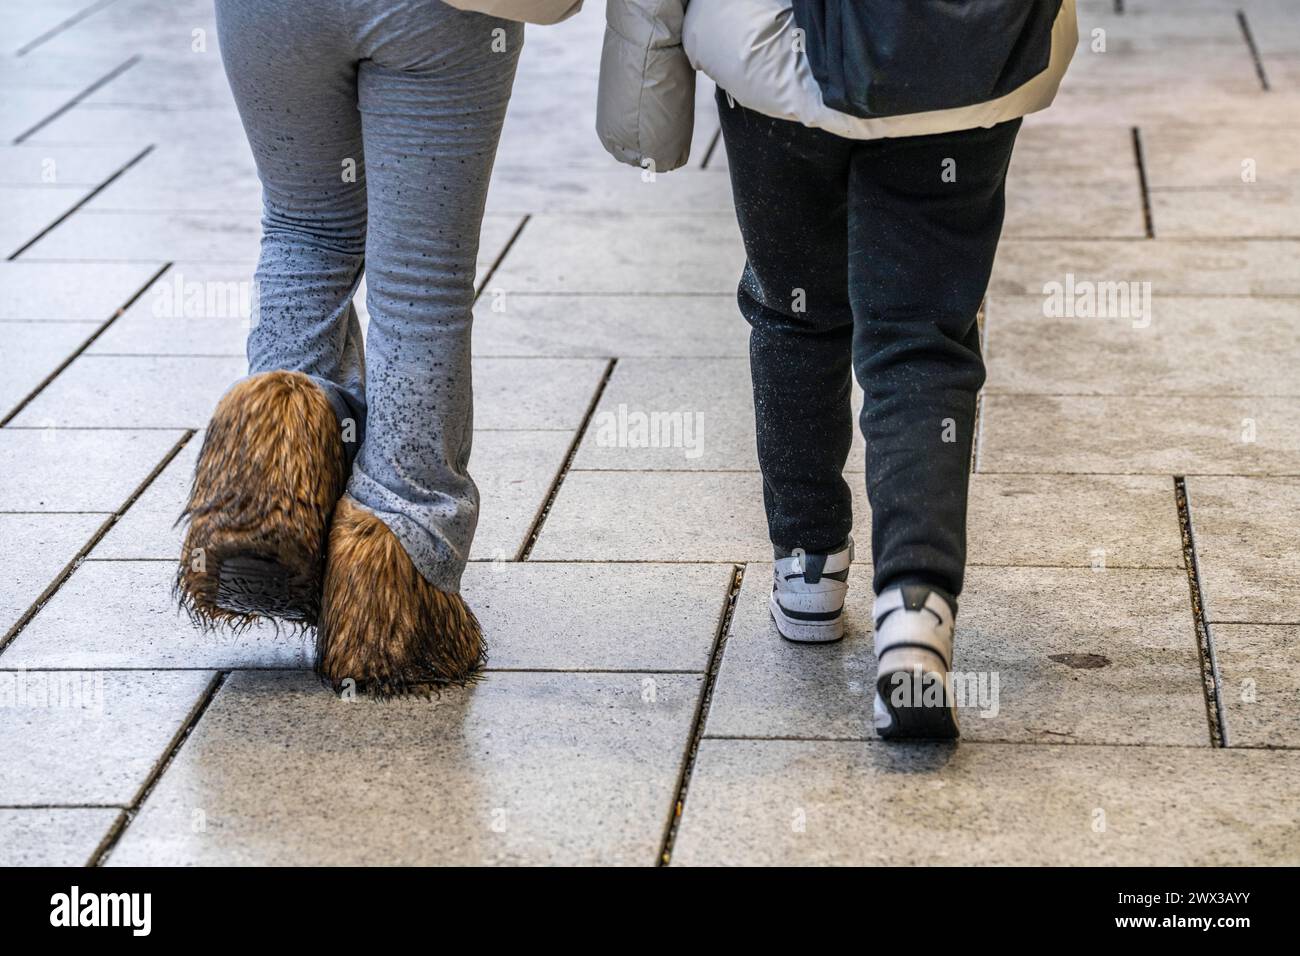 2 women walking in the rain, one woman wearing boots with long fur, wet, dirty, water splashes on her trousers, Stock Photo